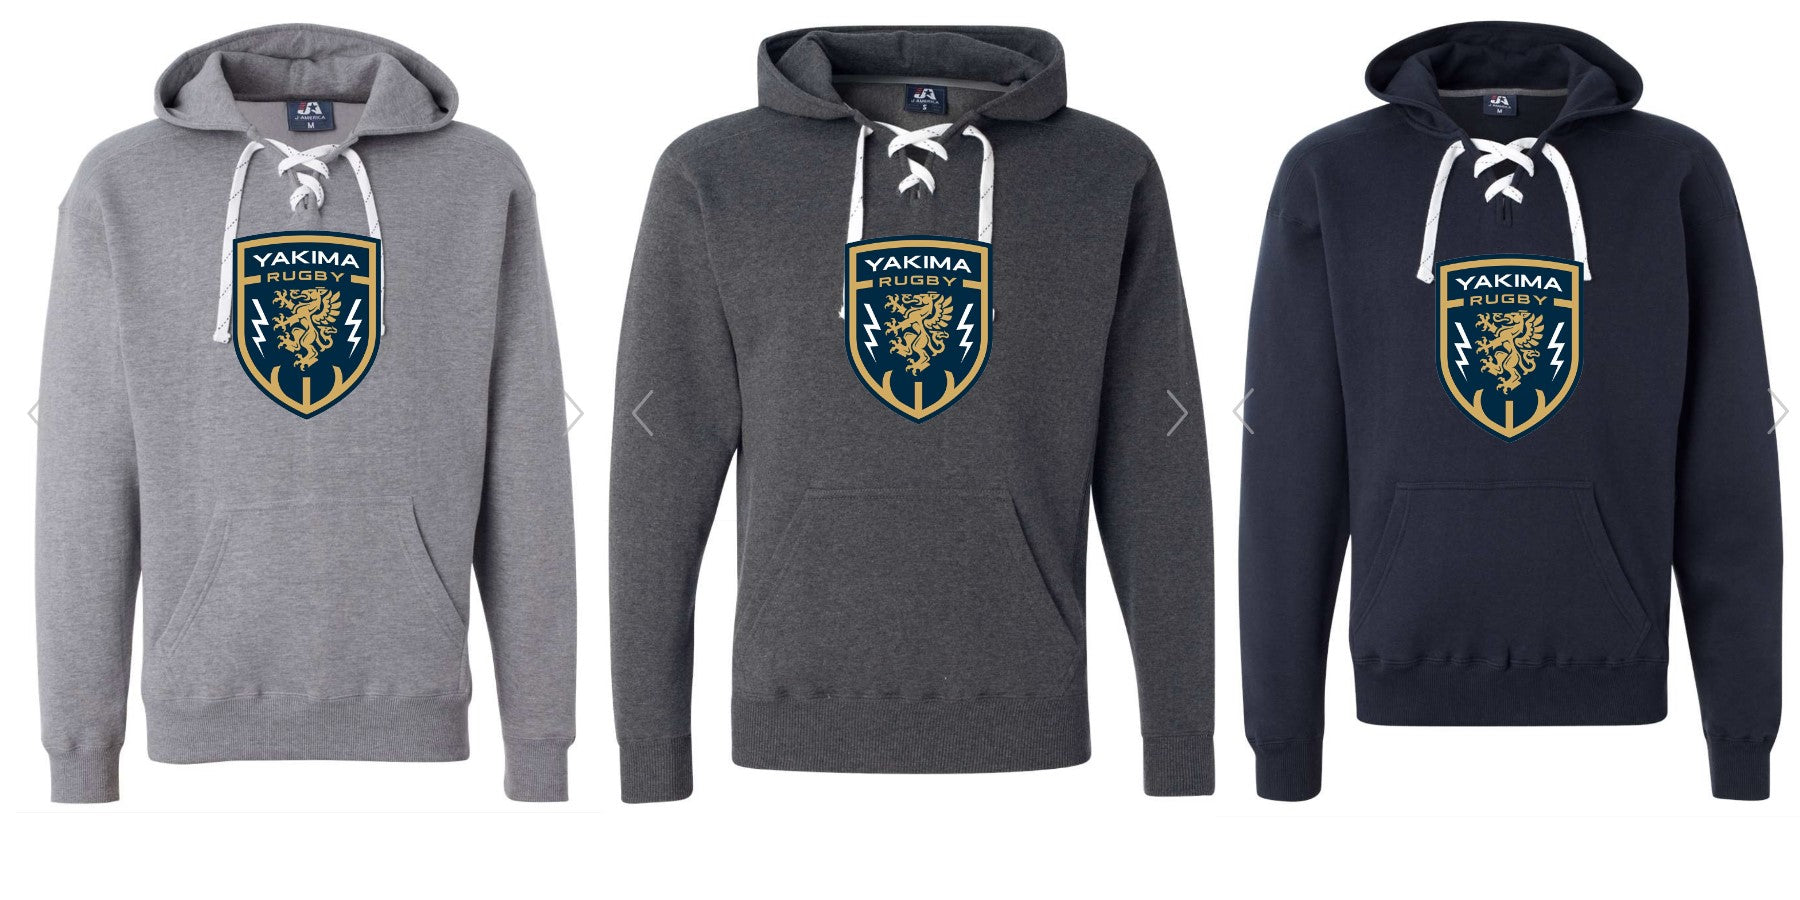 YAKIMA RUGBY SPORT LACE HOODIE